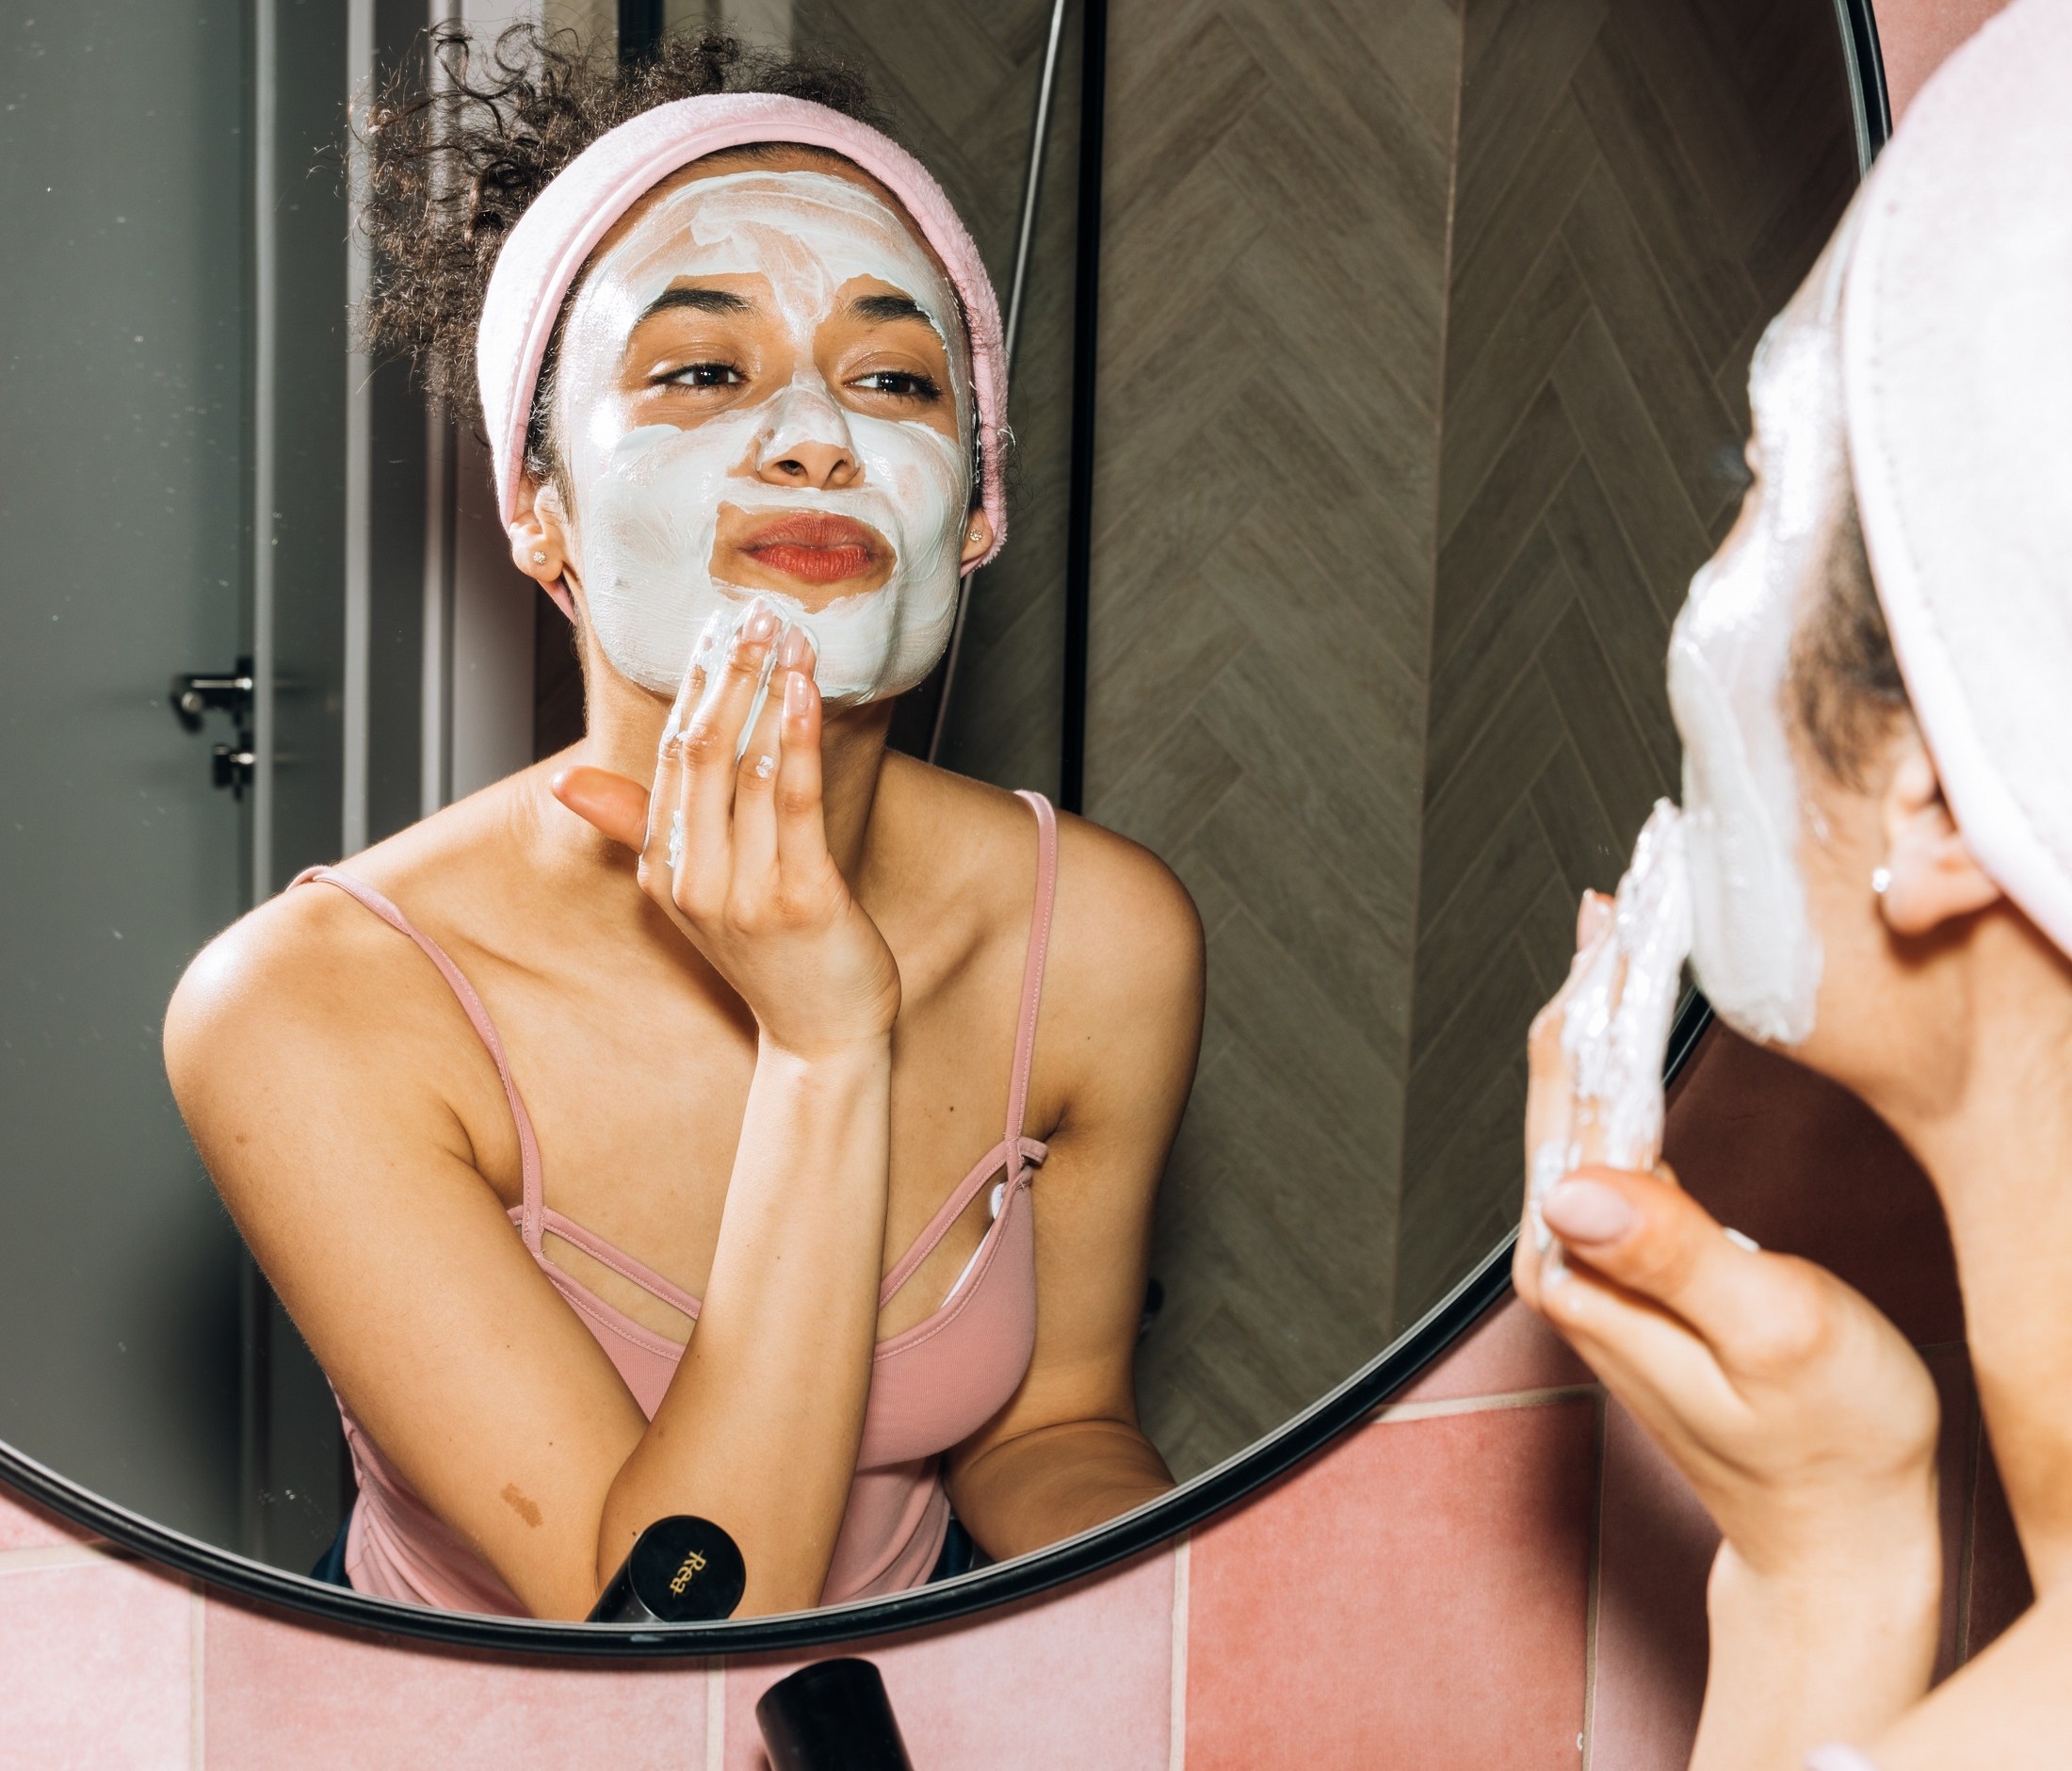 What can you do to make your daily skincare routine more environmentally friendly?